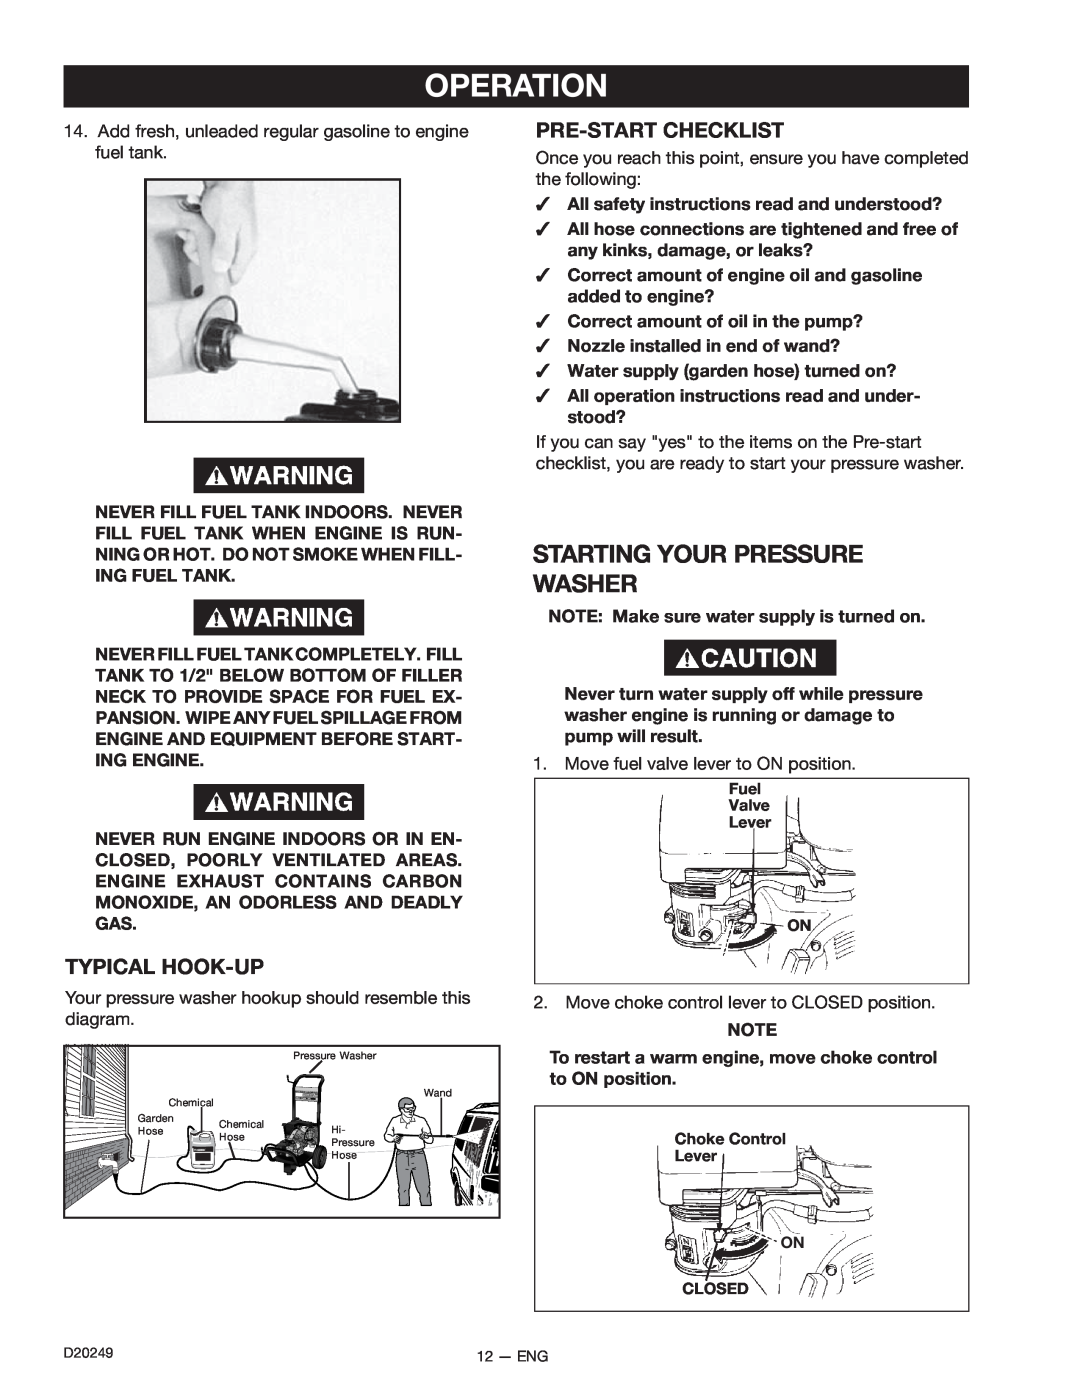 DeVillbiss Air Power Company D20249 Starting Your Pressure Washer, Typical Hook-Up, Pre-Startchecklist, Operation 